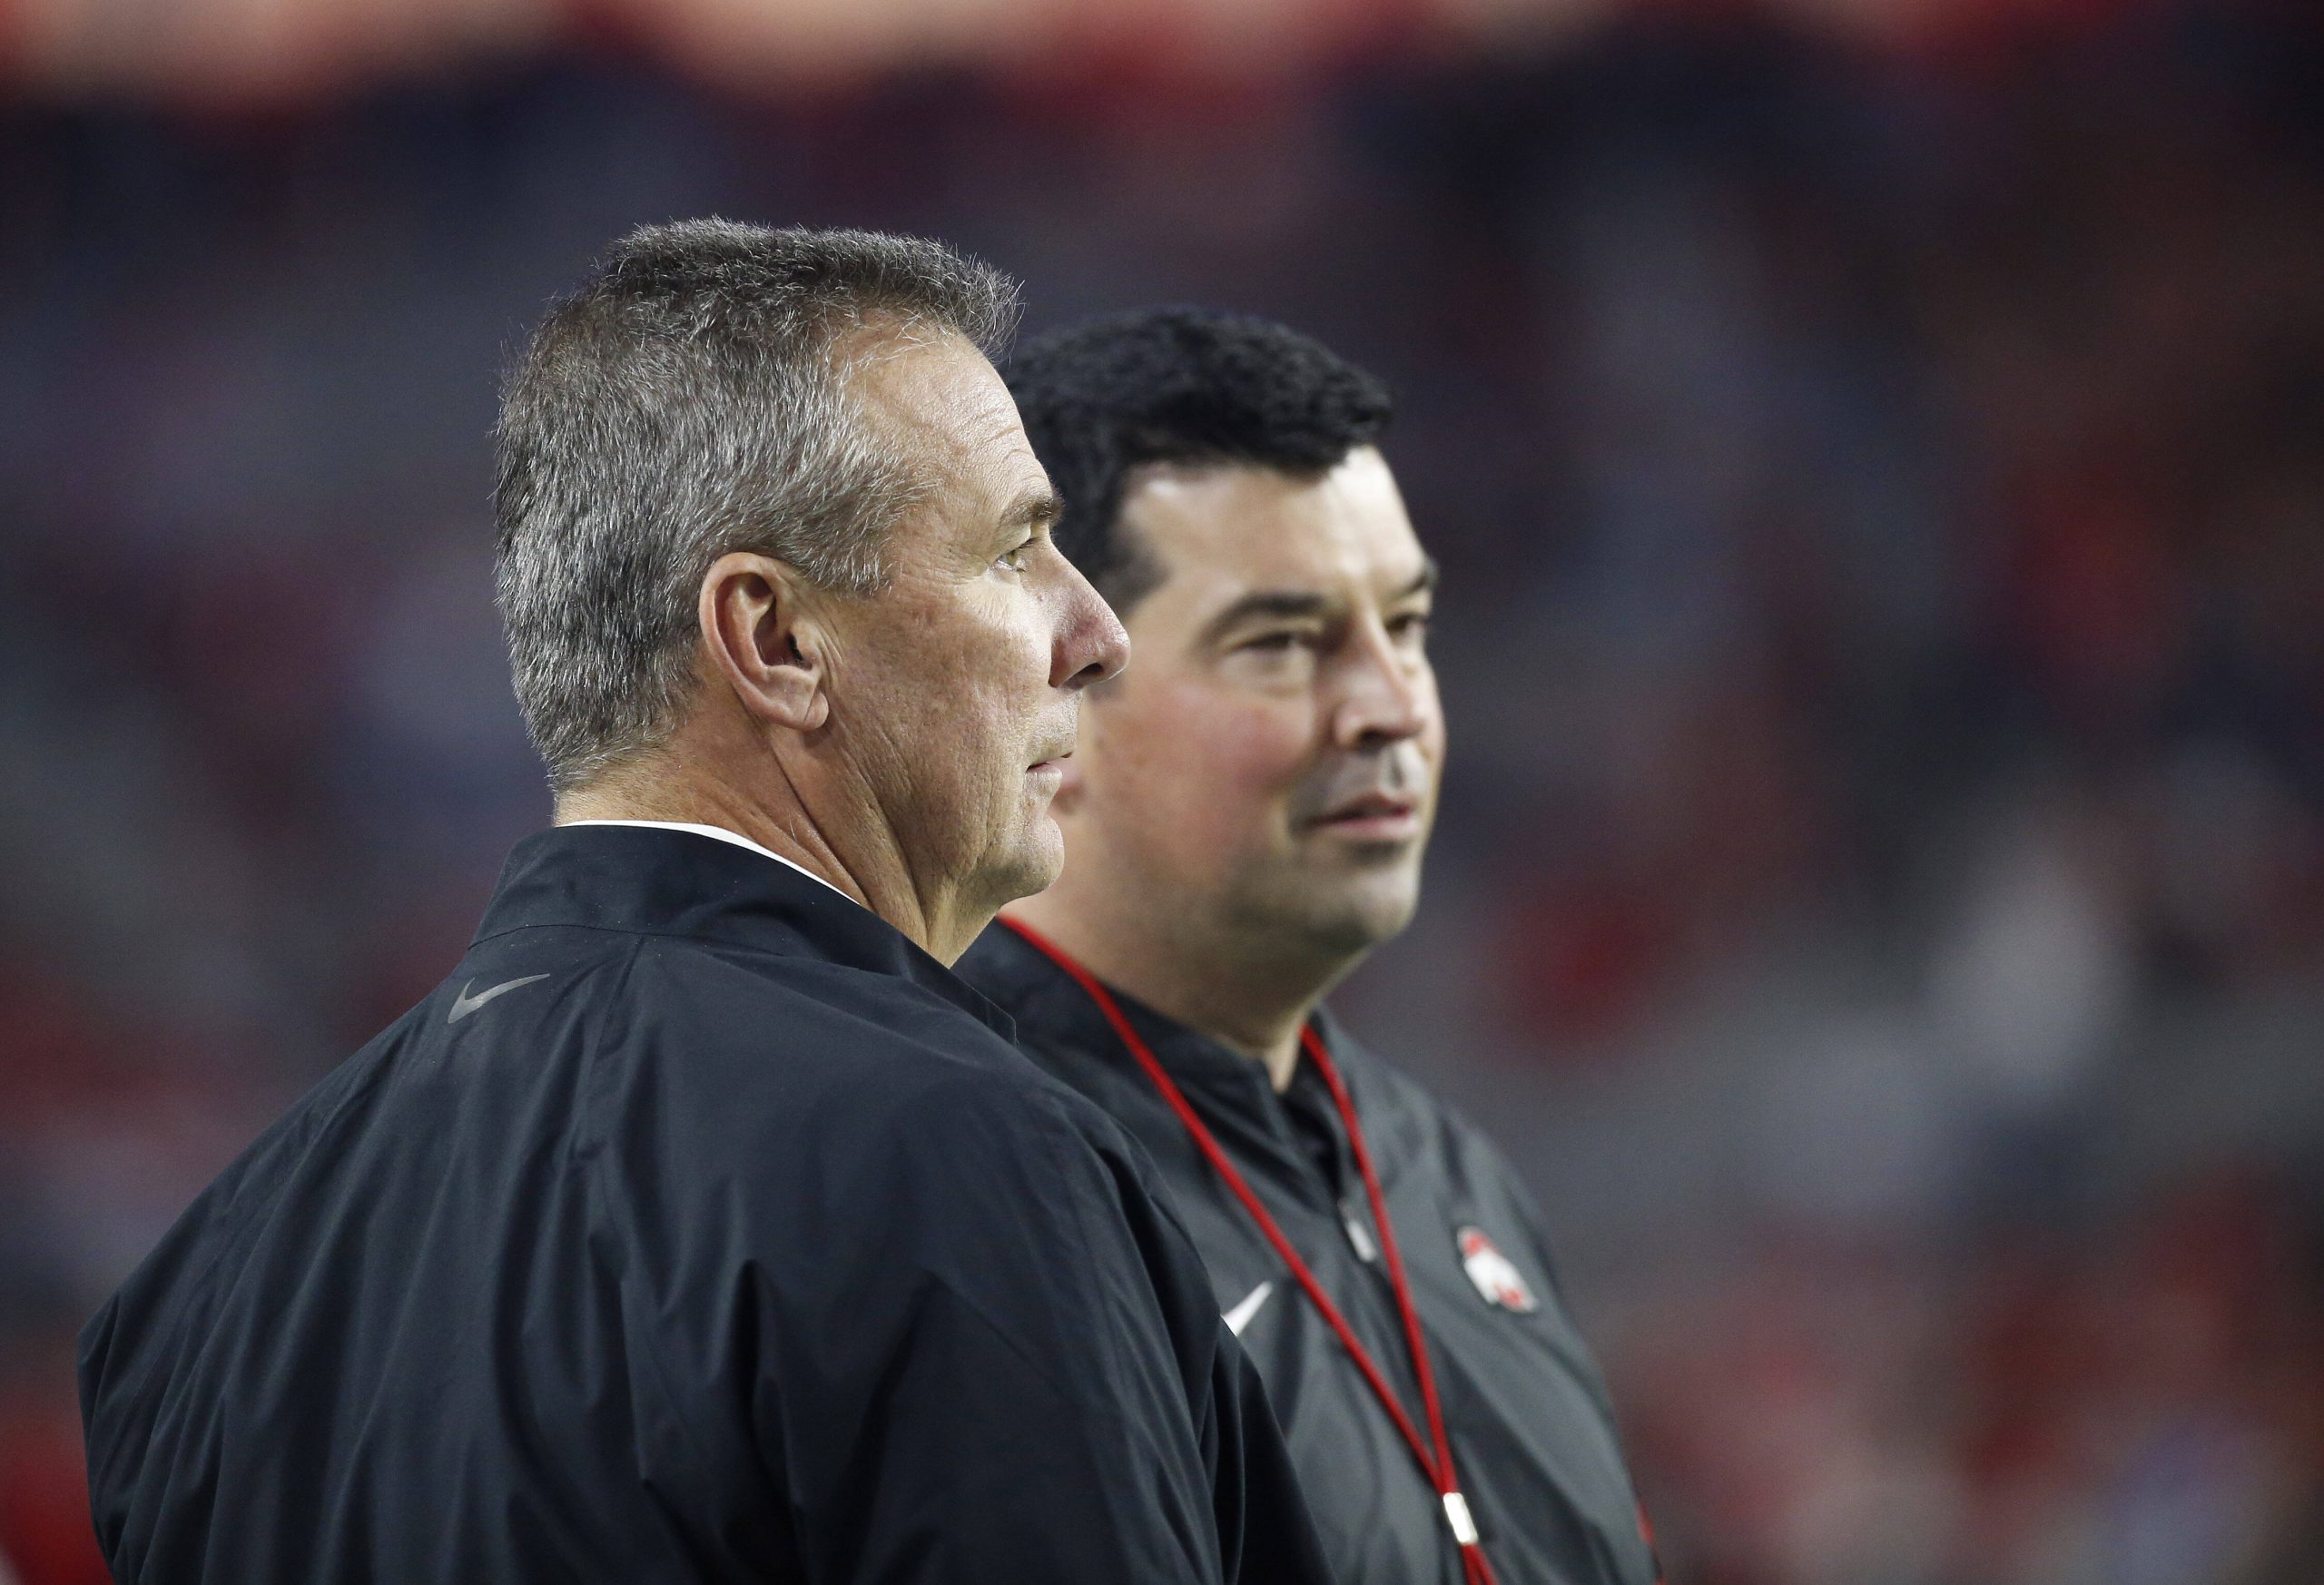 December 28, 2019 Former Ohio State coach Urban Meyer with Ohio State Buckeyes head coach Ryan Day in action during the